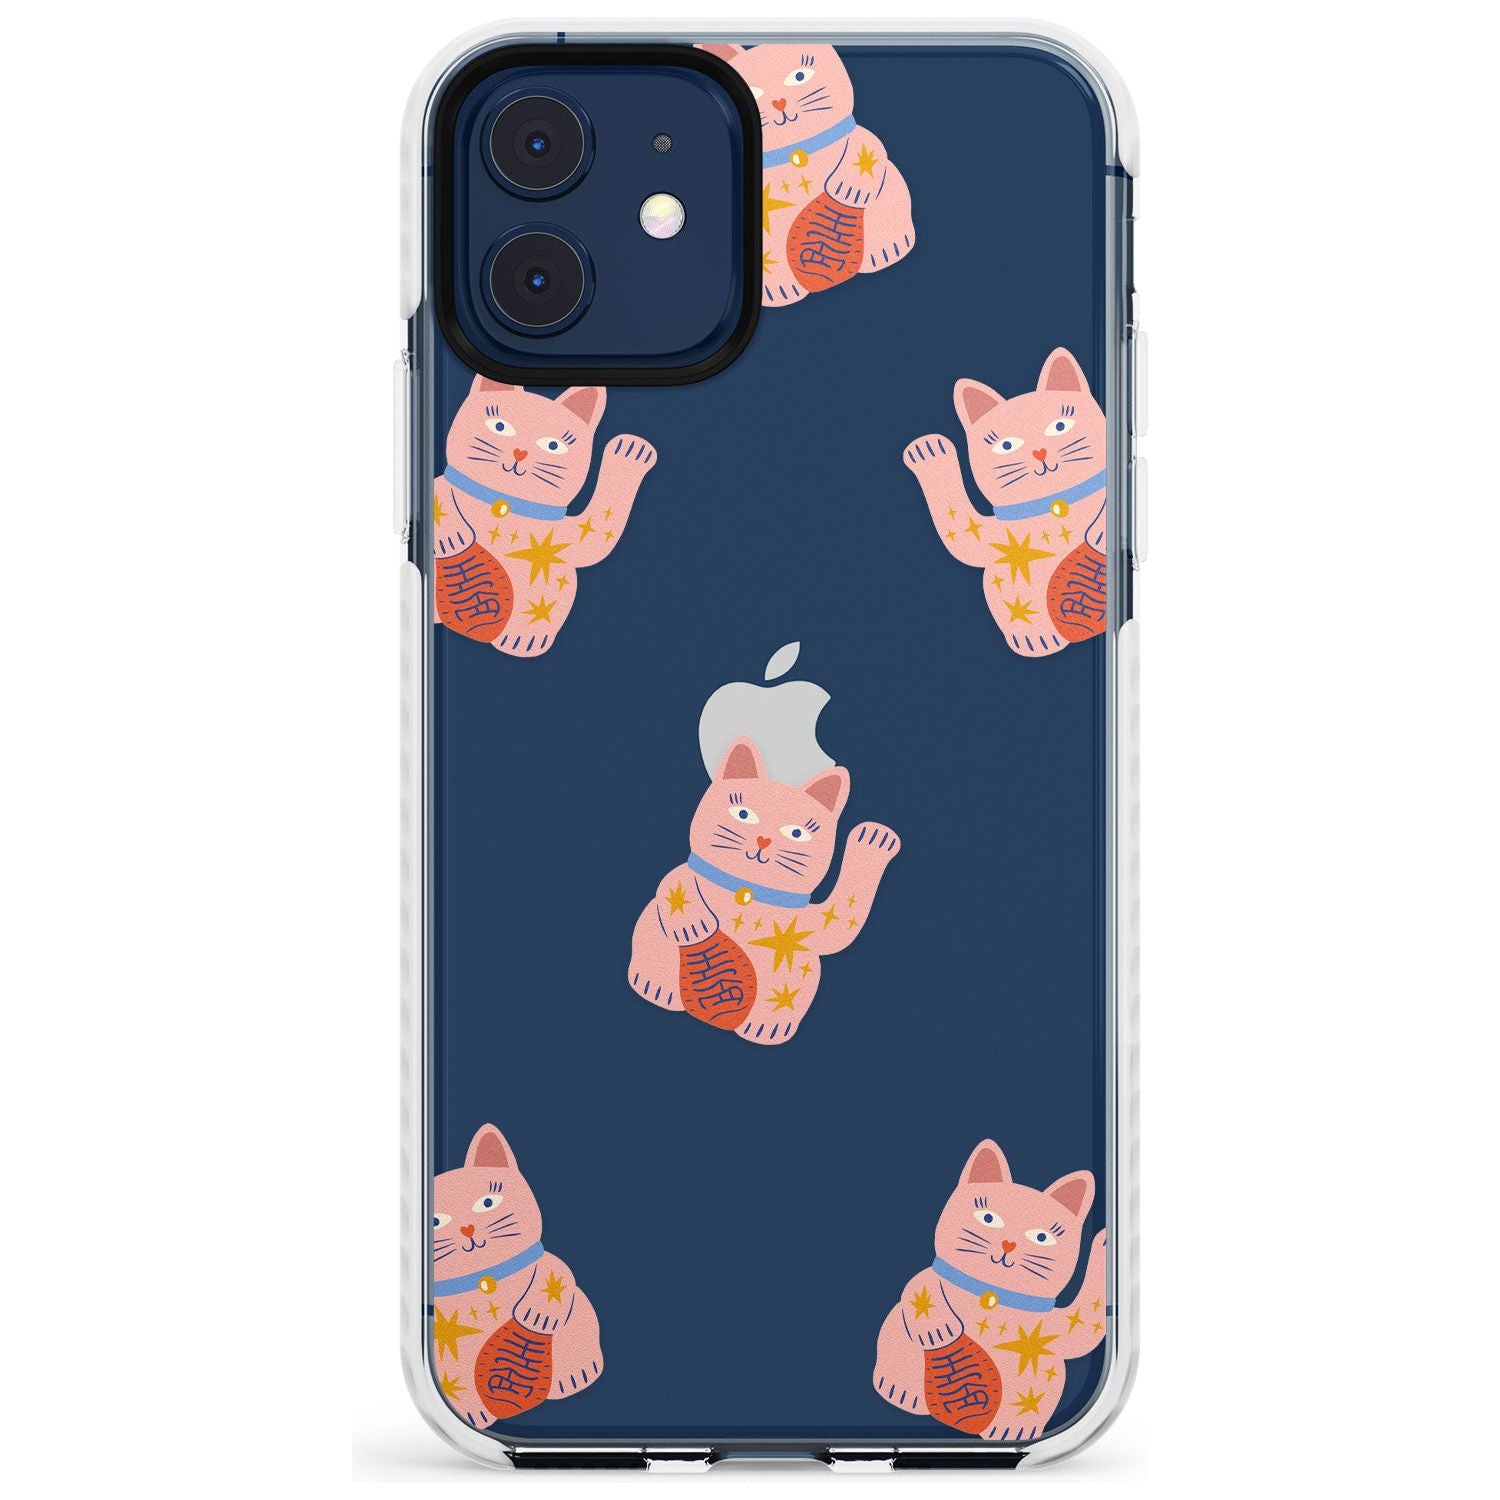 Waving Cat Pattern Impact Phone Case for iPhone 11